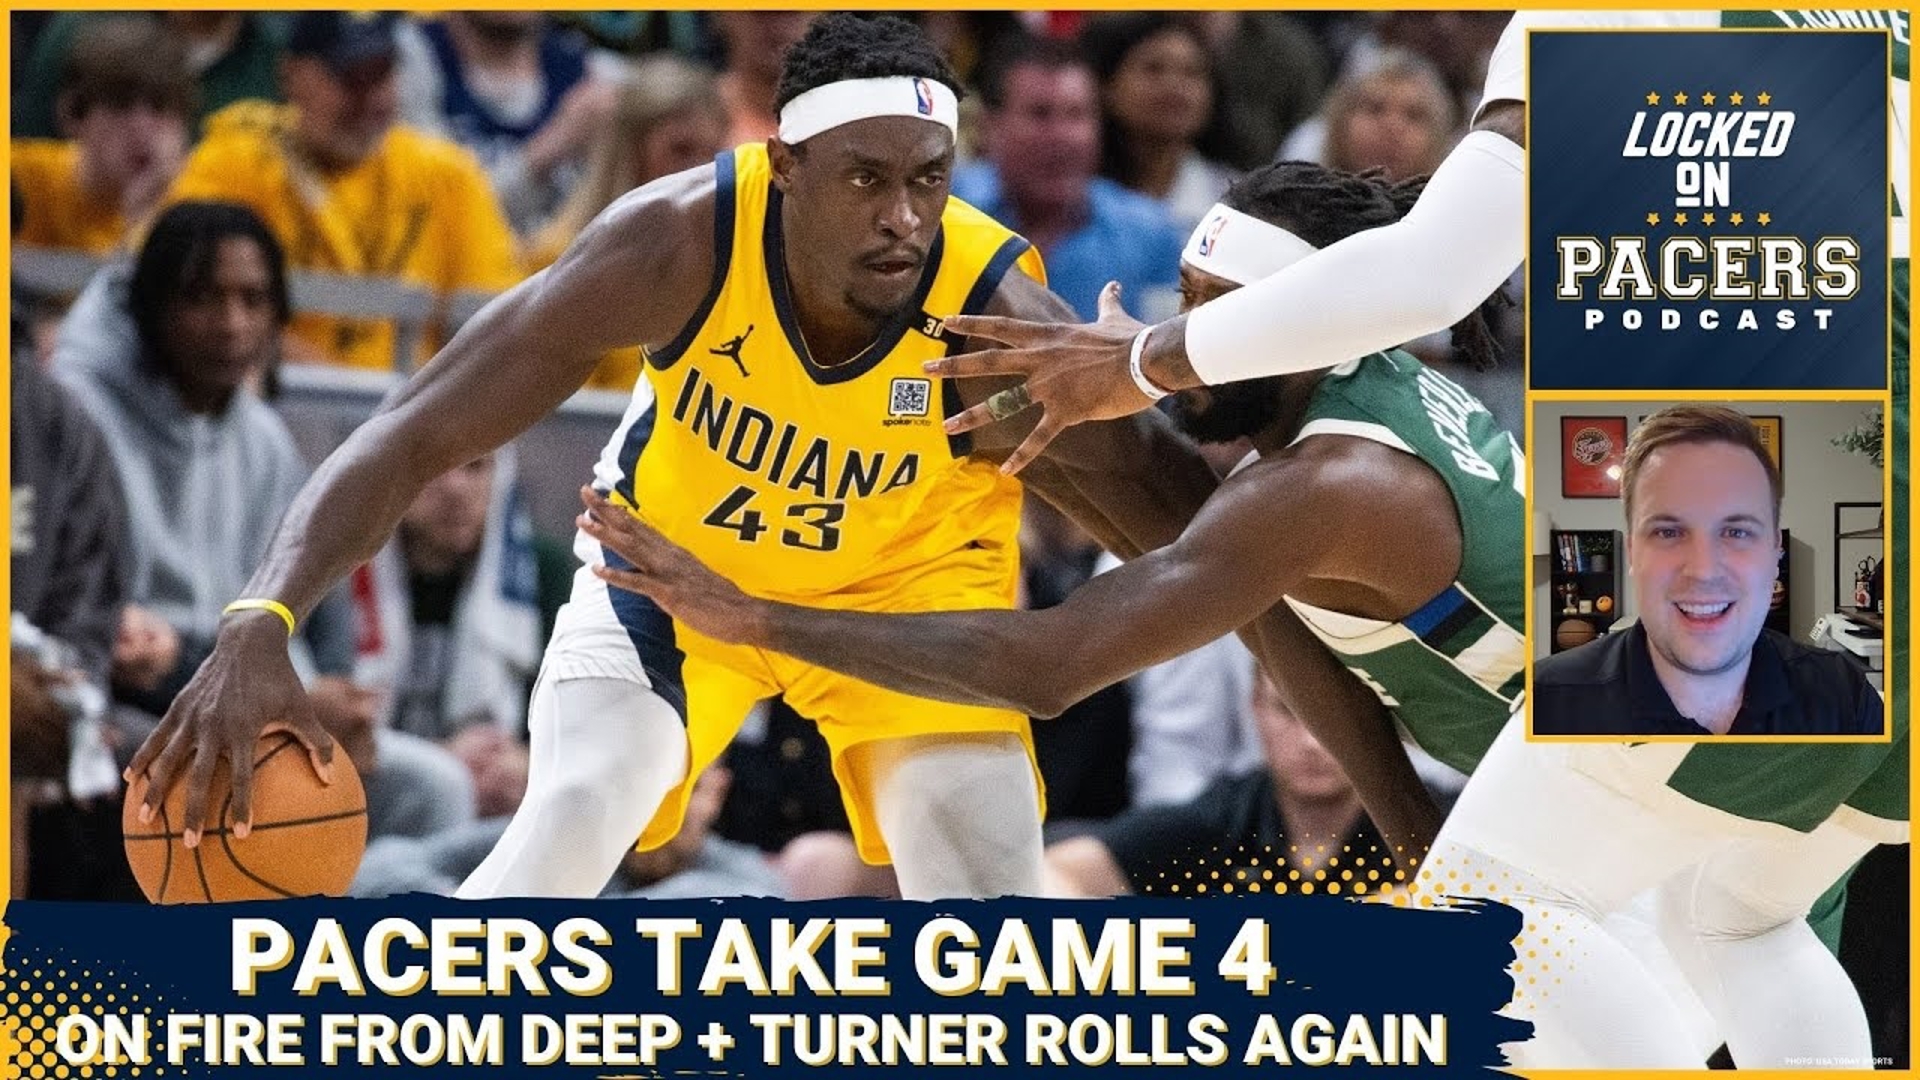 The Indiana Pacers took down the Milwaukee Bucks in Game 4 thanks to excellent outside shooting, Myles Turner dominating, and great play from several role players.